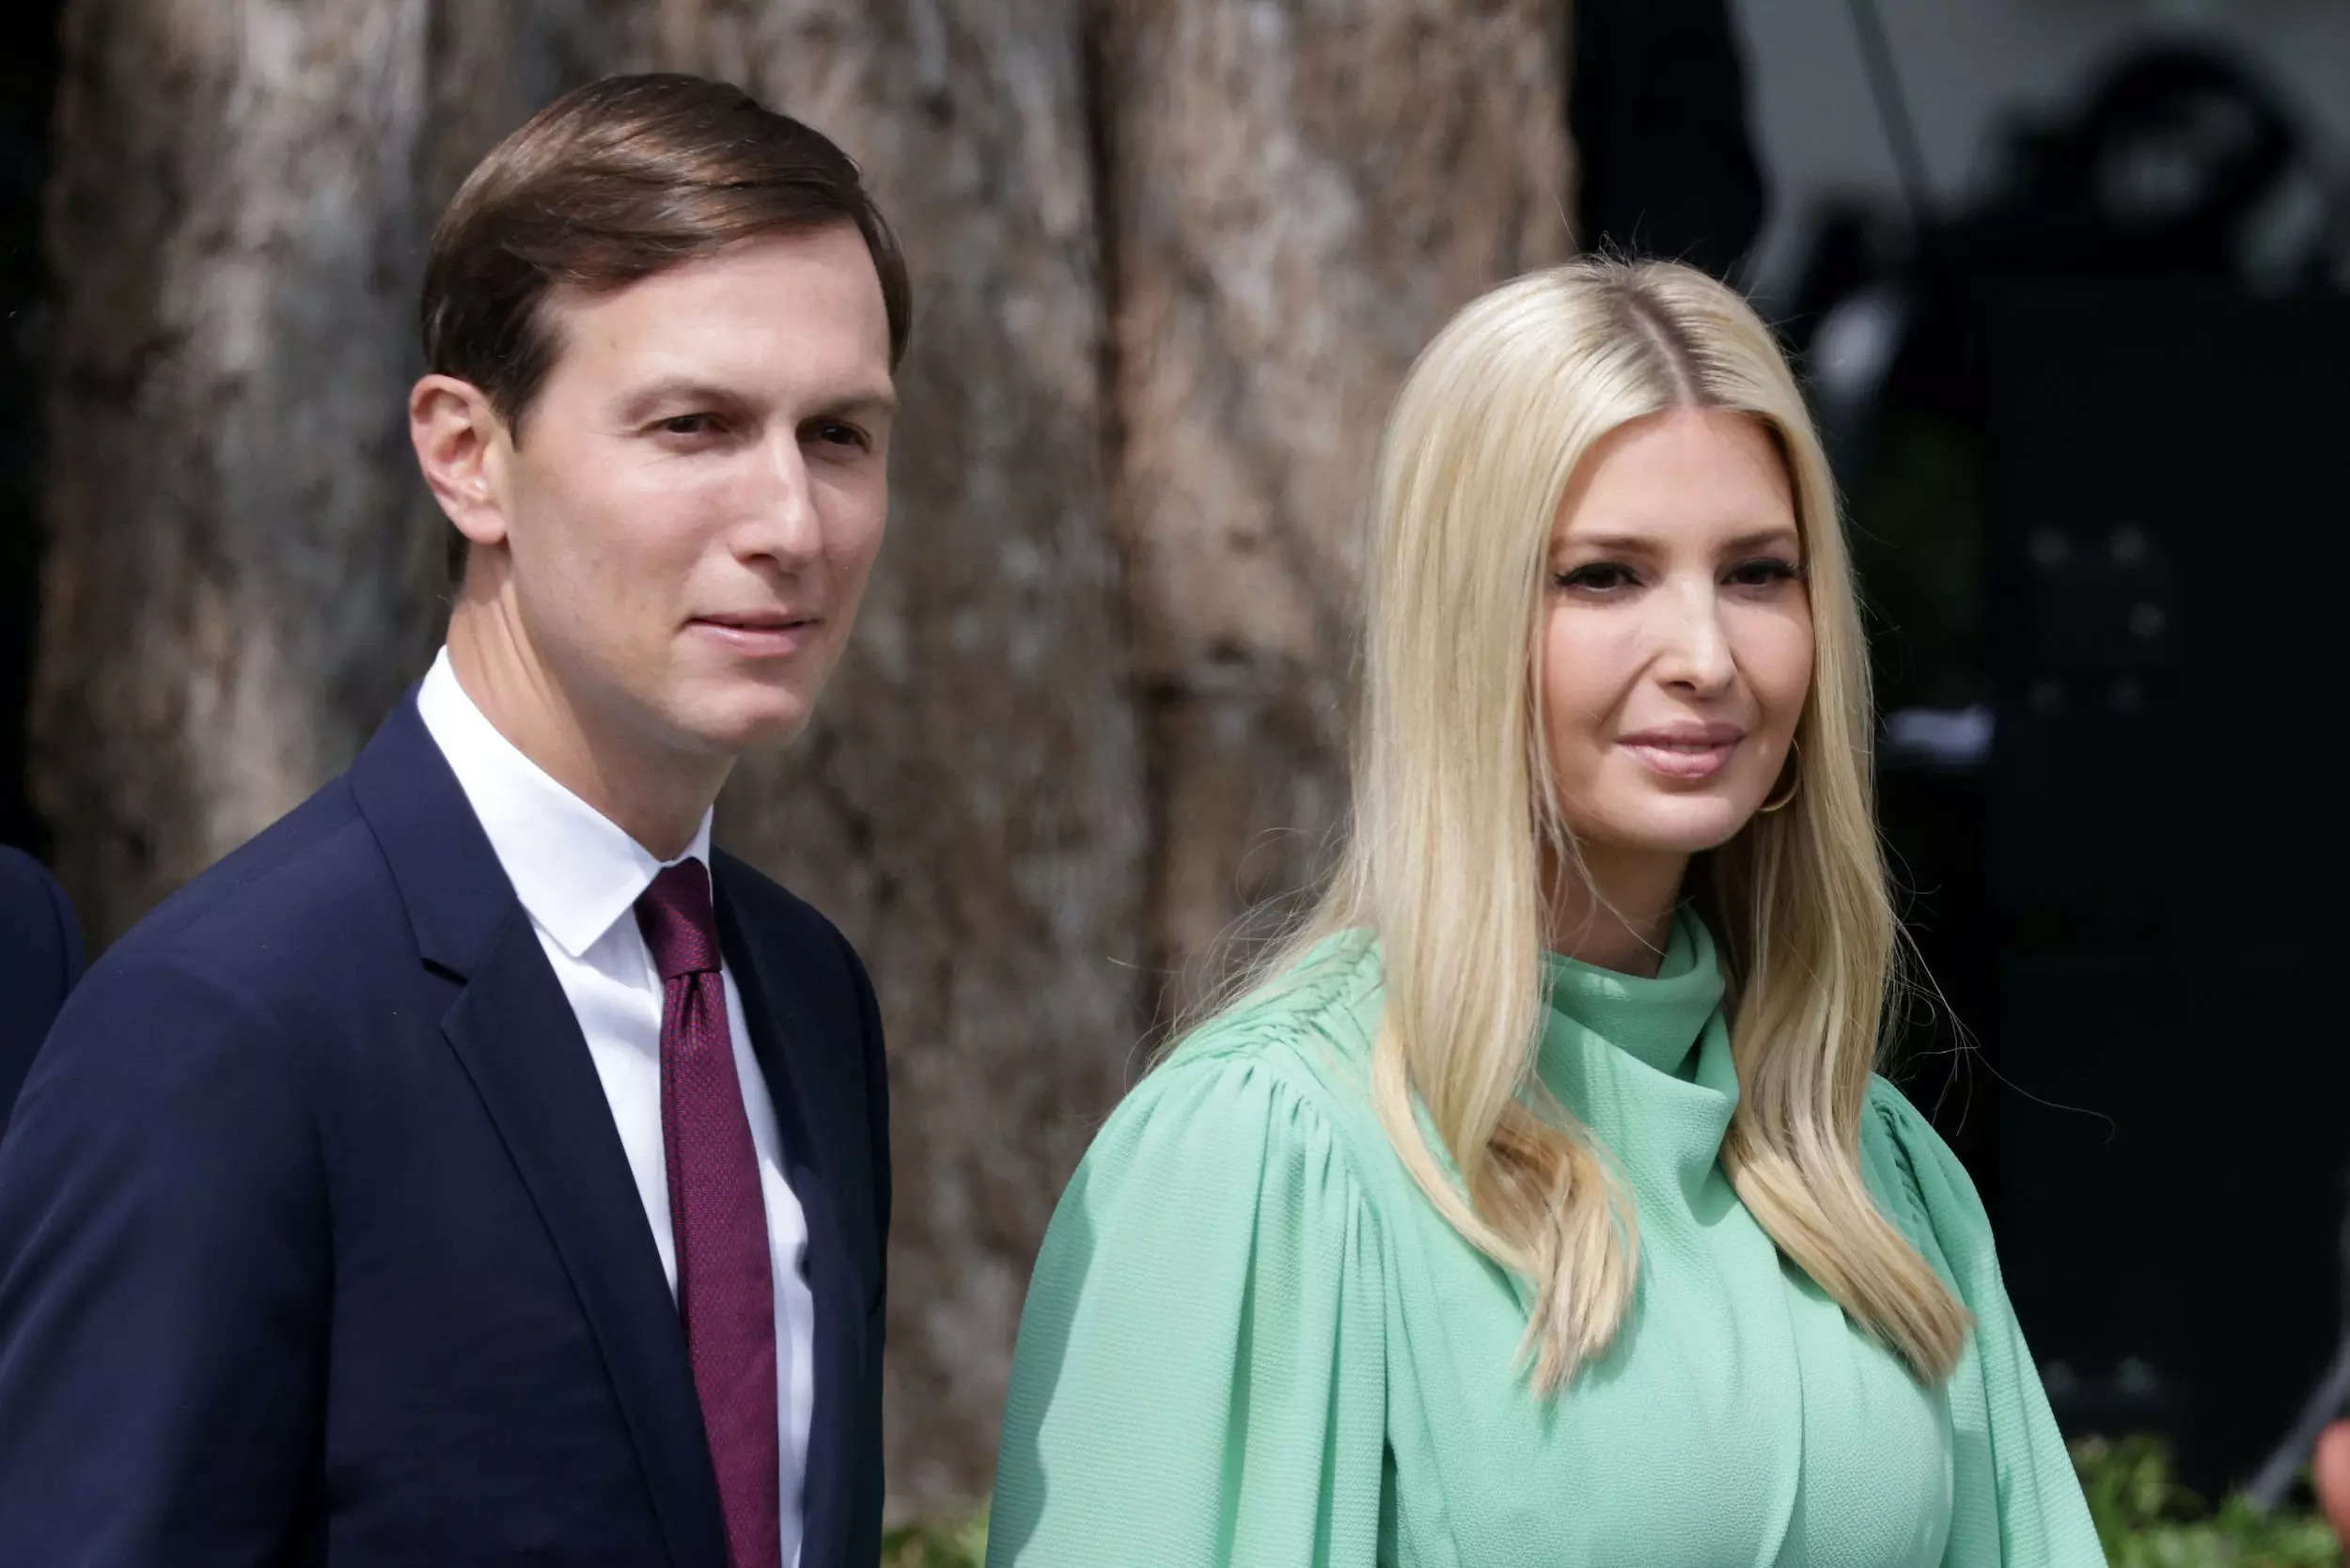 Jared Kushner said that Donald Trump called Ivanka after he asked the forme...